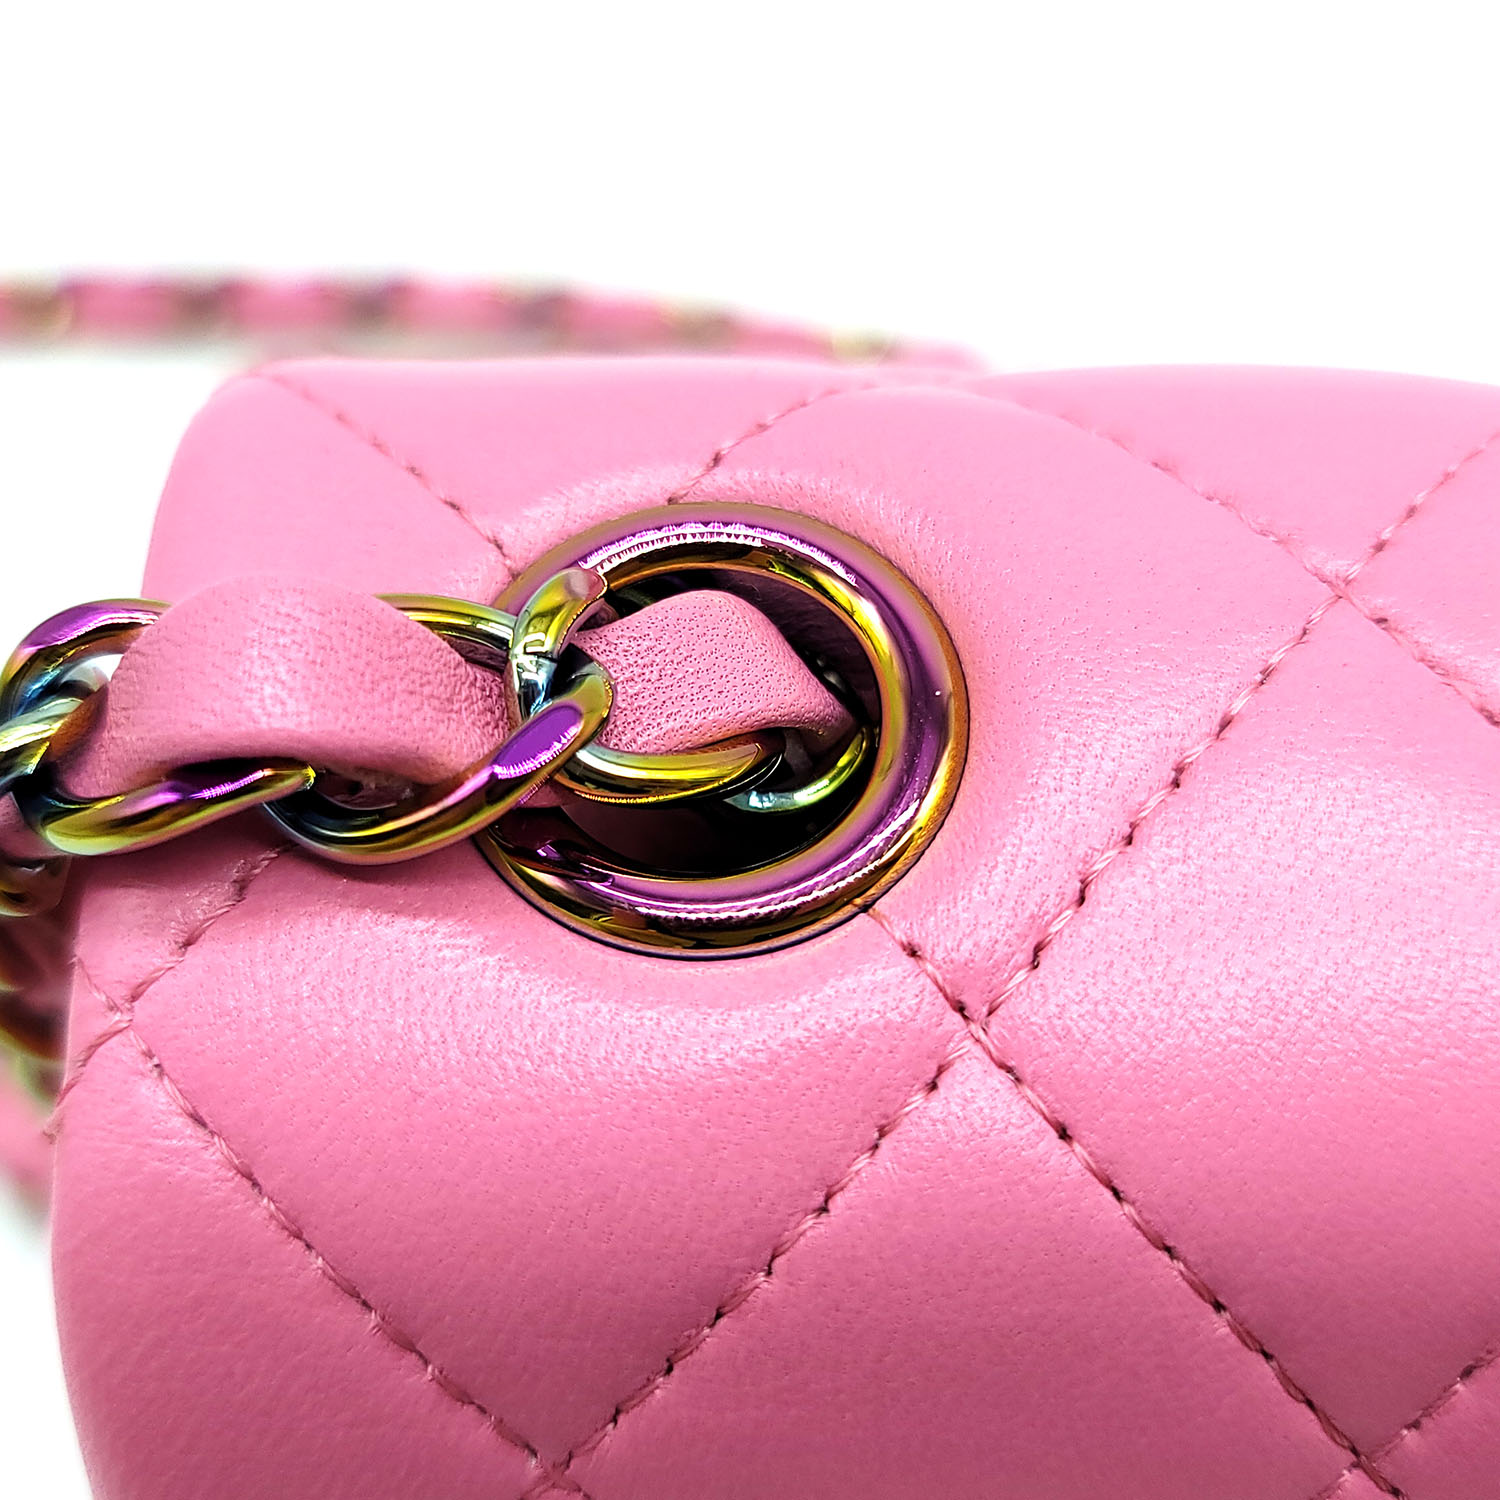 Chanel Mini Classic Flap Bag Pink Quilted Lambskin/Rainbow Hardware ...